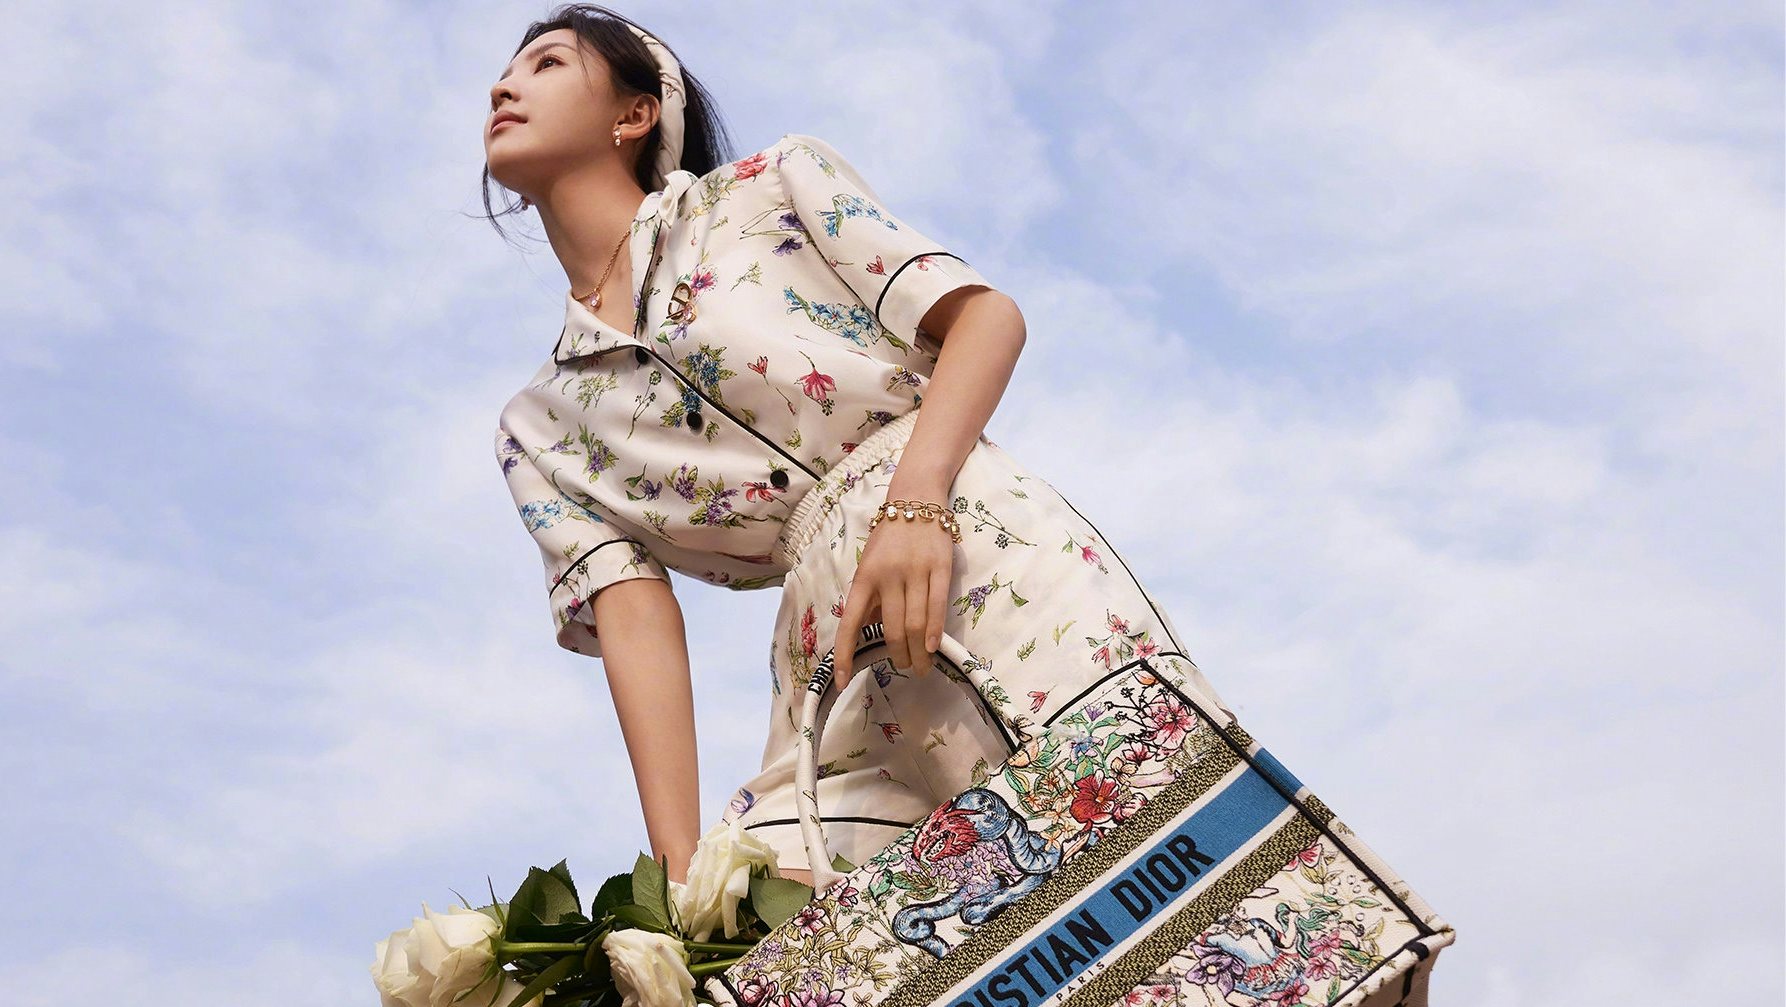 Will China's zero-COVID policy endanger luxury expansion efforts? Not in the long-term: most brands should already have contingency strategies in place. Photo: Dior